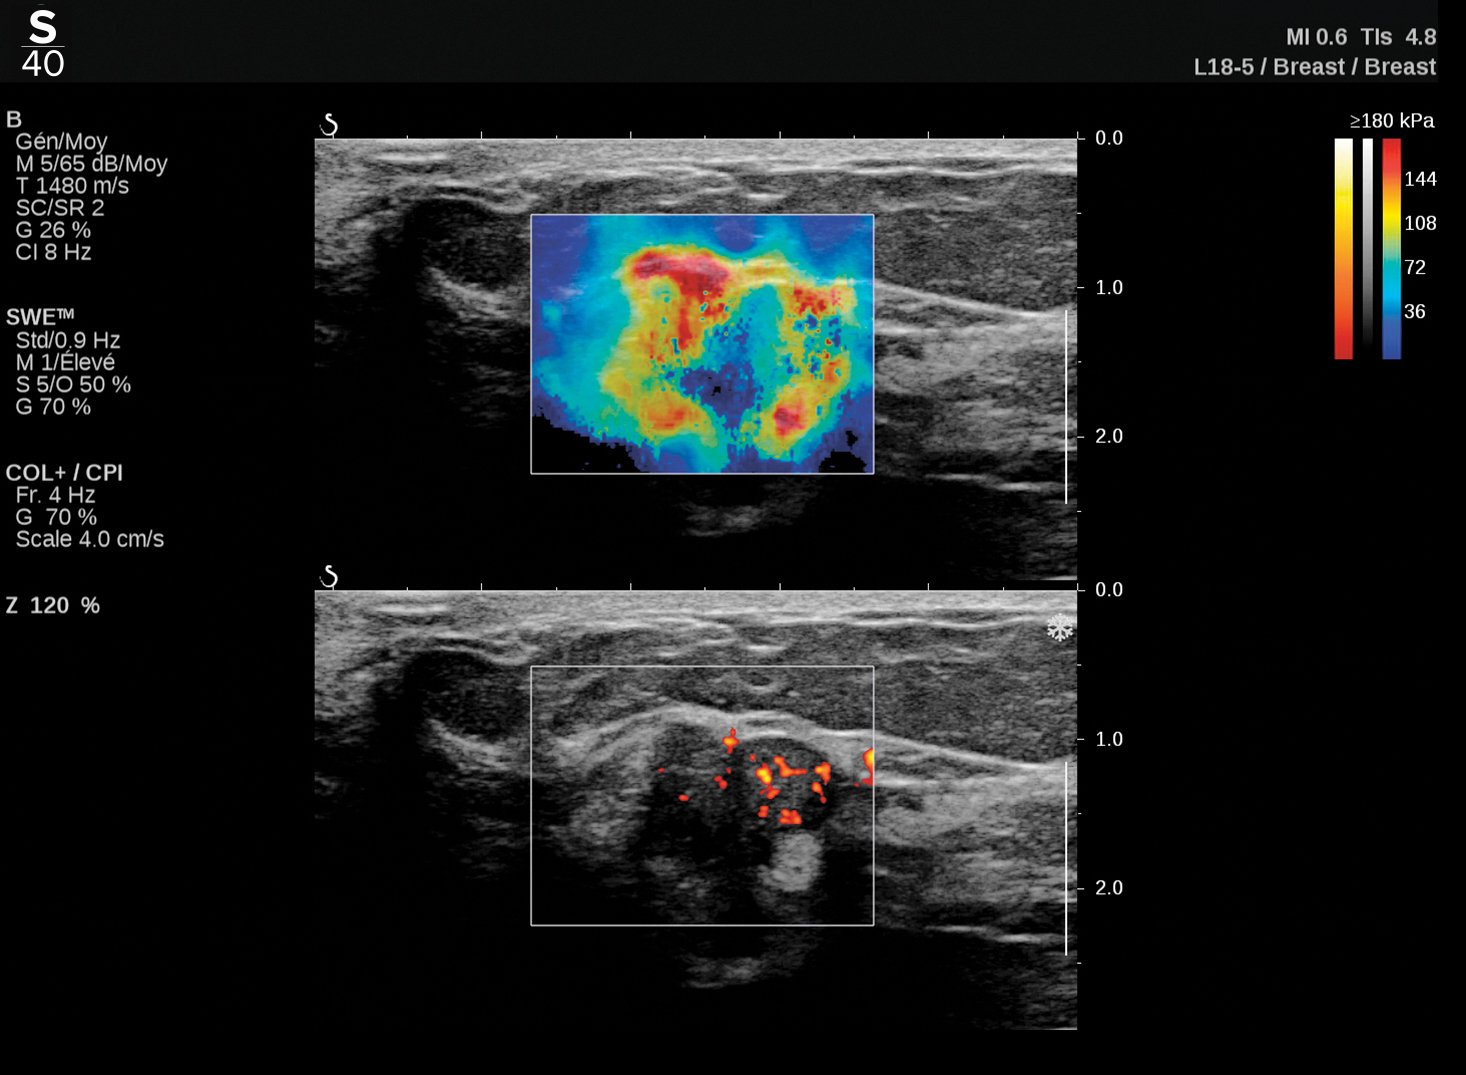 This is an example of 3-D ultrasound imaging on a breast, designed to help increase efficiency and diagnostic accuracy in any practice. Image courtesy of Hologic.